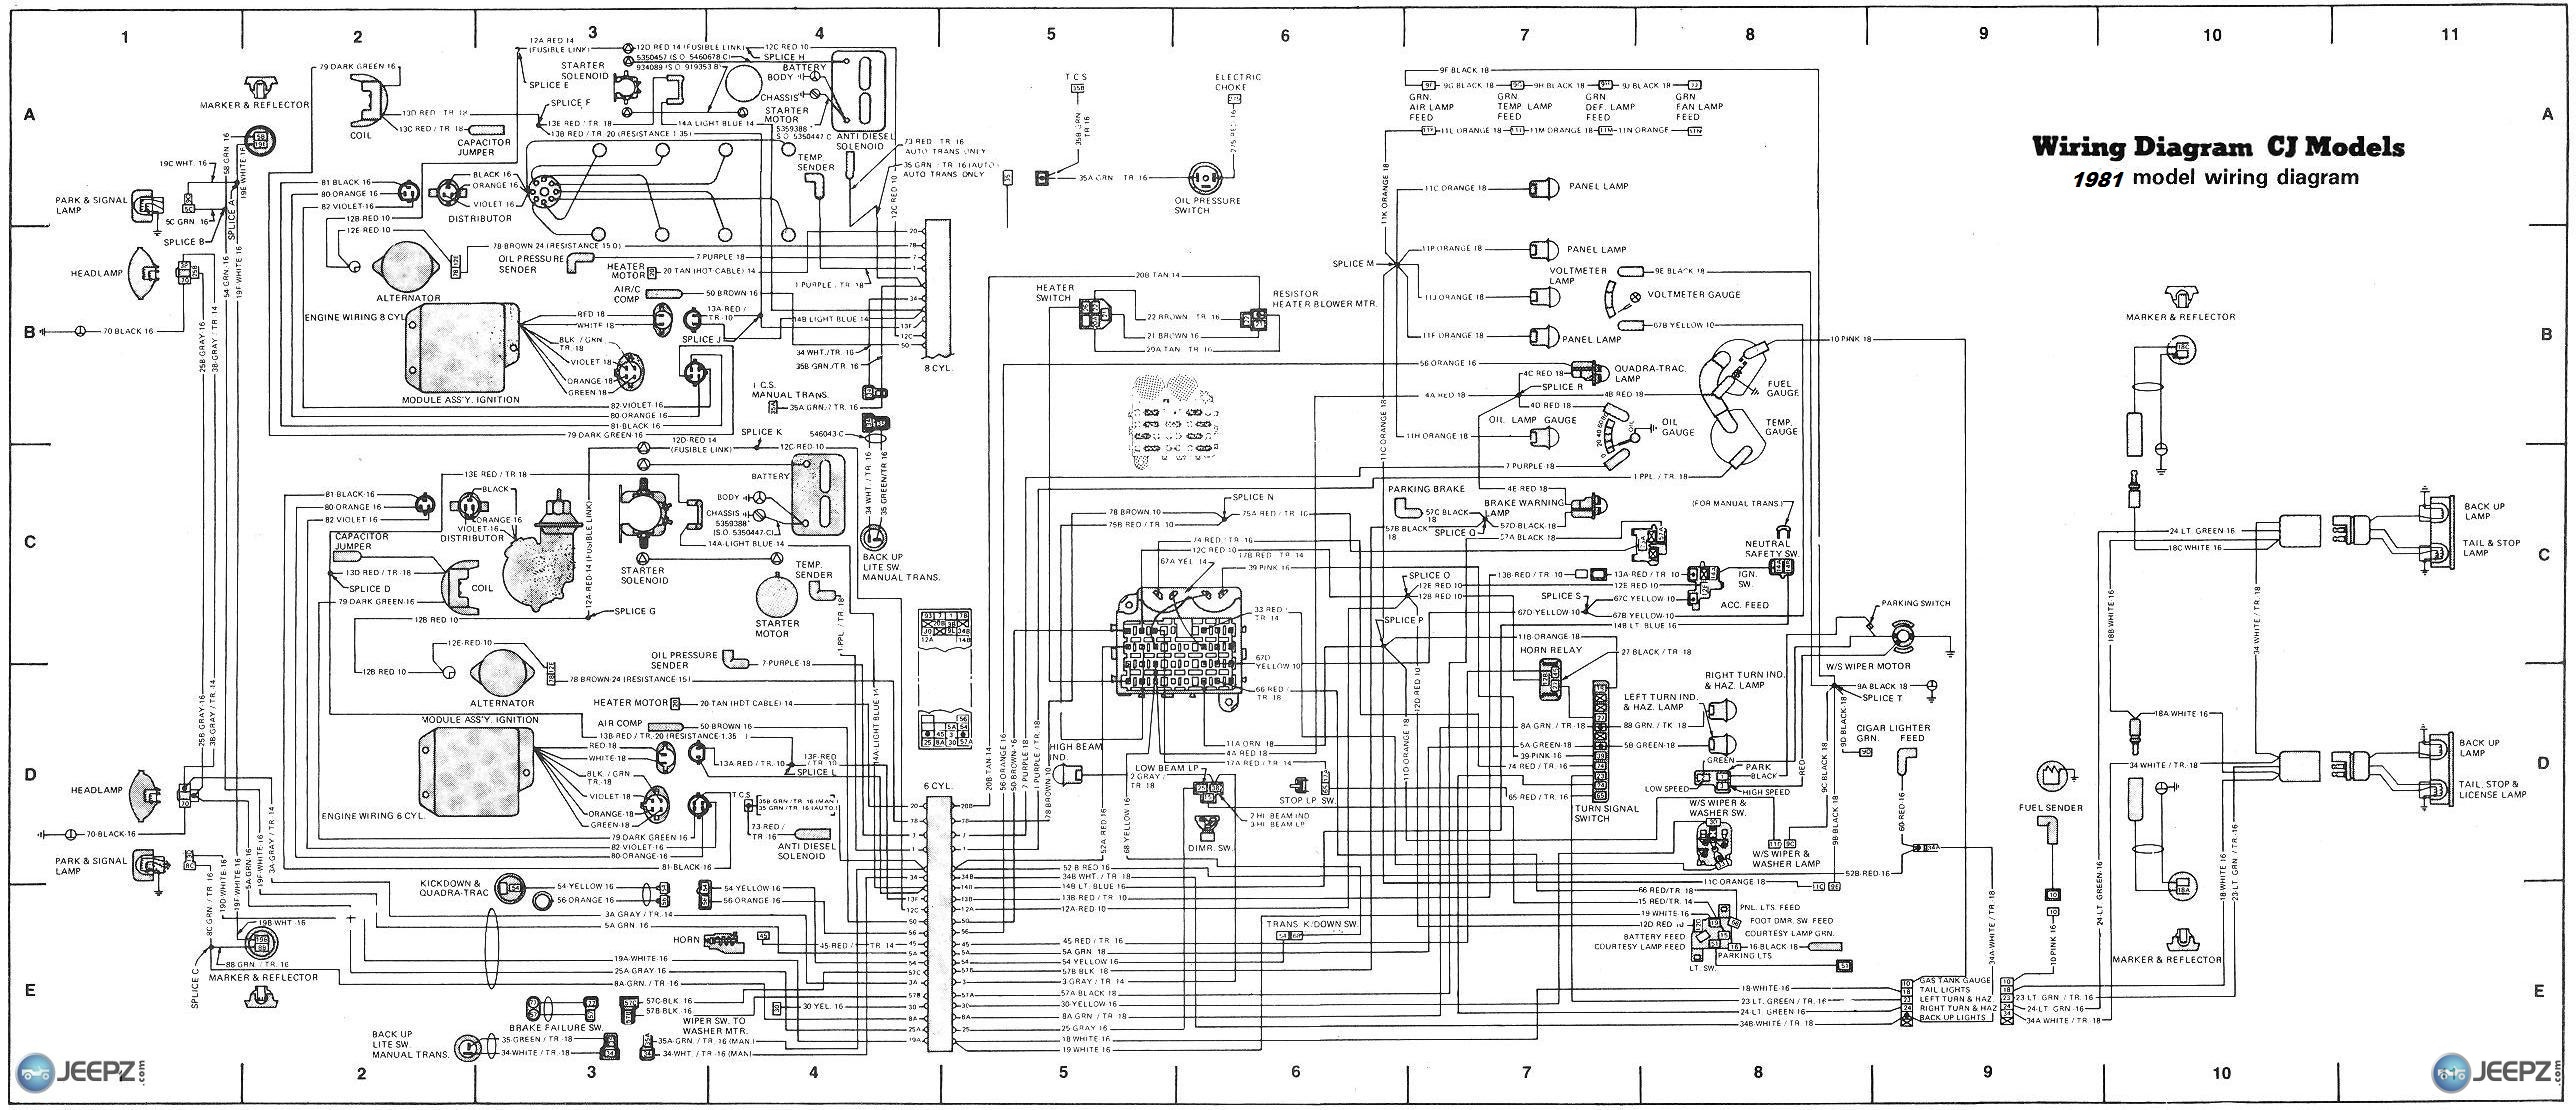 Painless Wiring Harness Diagram 73 Jeep - Wiring Diagrams Hubs - Painless Wiring Harness Diagram